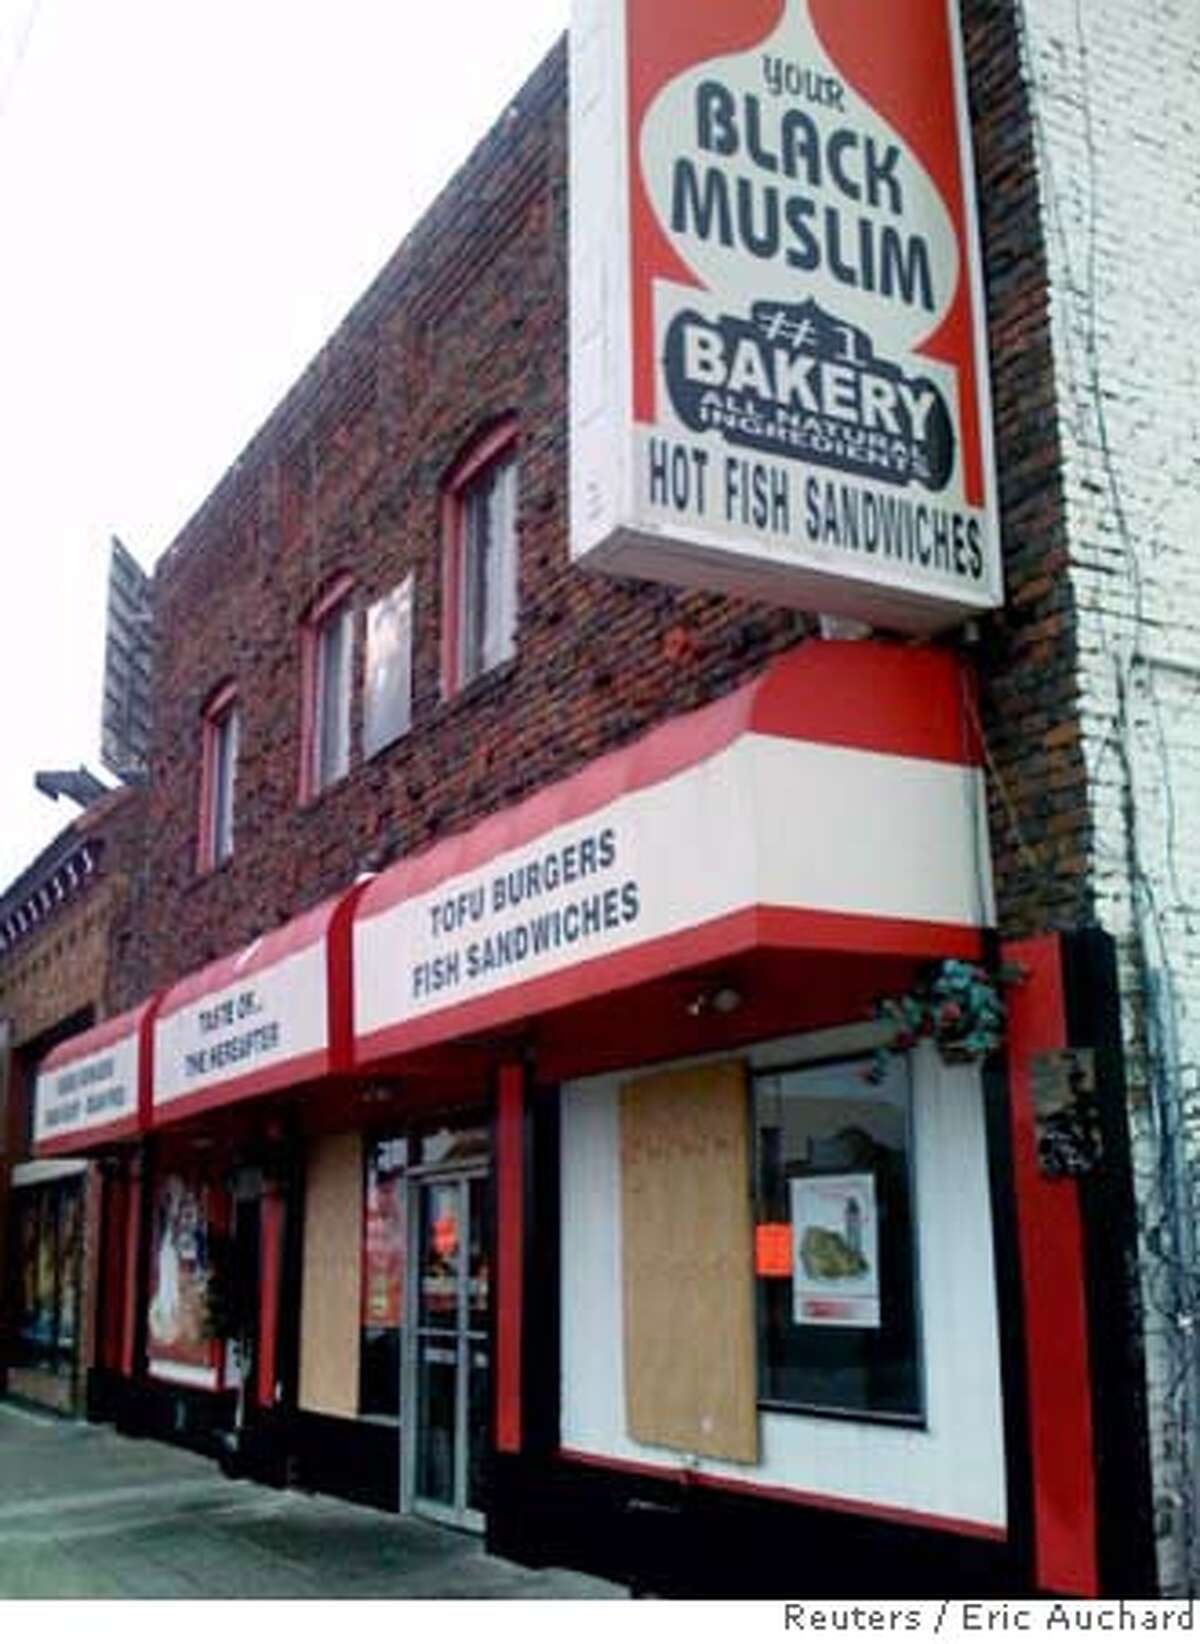 Your Black Muslim Bakery is seen in North Oakland, California, in this August 5, 2007 picture. The bakery was the cornerstone establishment of a local self-help group that has been implicated by Oakland police in the murder of local journalist Chauncey Bailey, the editor-in-chief of the Oakland Post. The bakery was one of several establishments owned by the group which was raided by 200 police on August 3, who detained seven suspects, including one who later confessed to murdering Bailey. REUTERS/Eric Auchard (UNITED STATES)